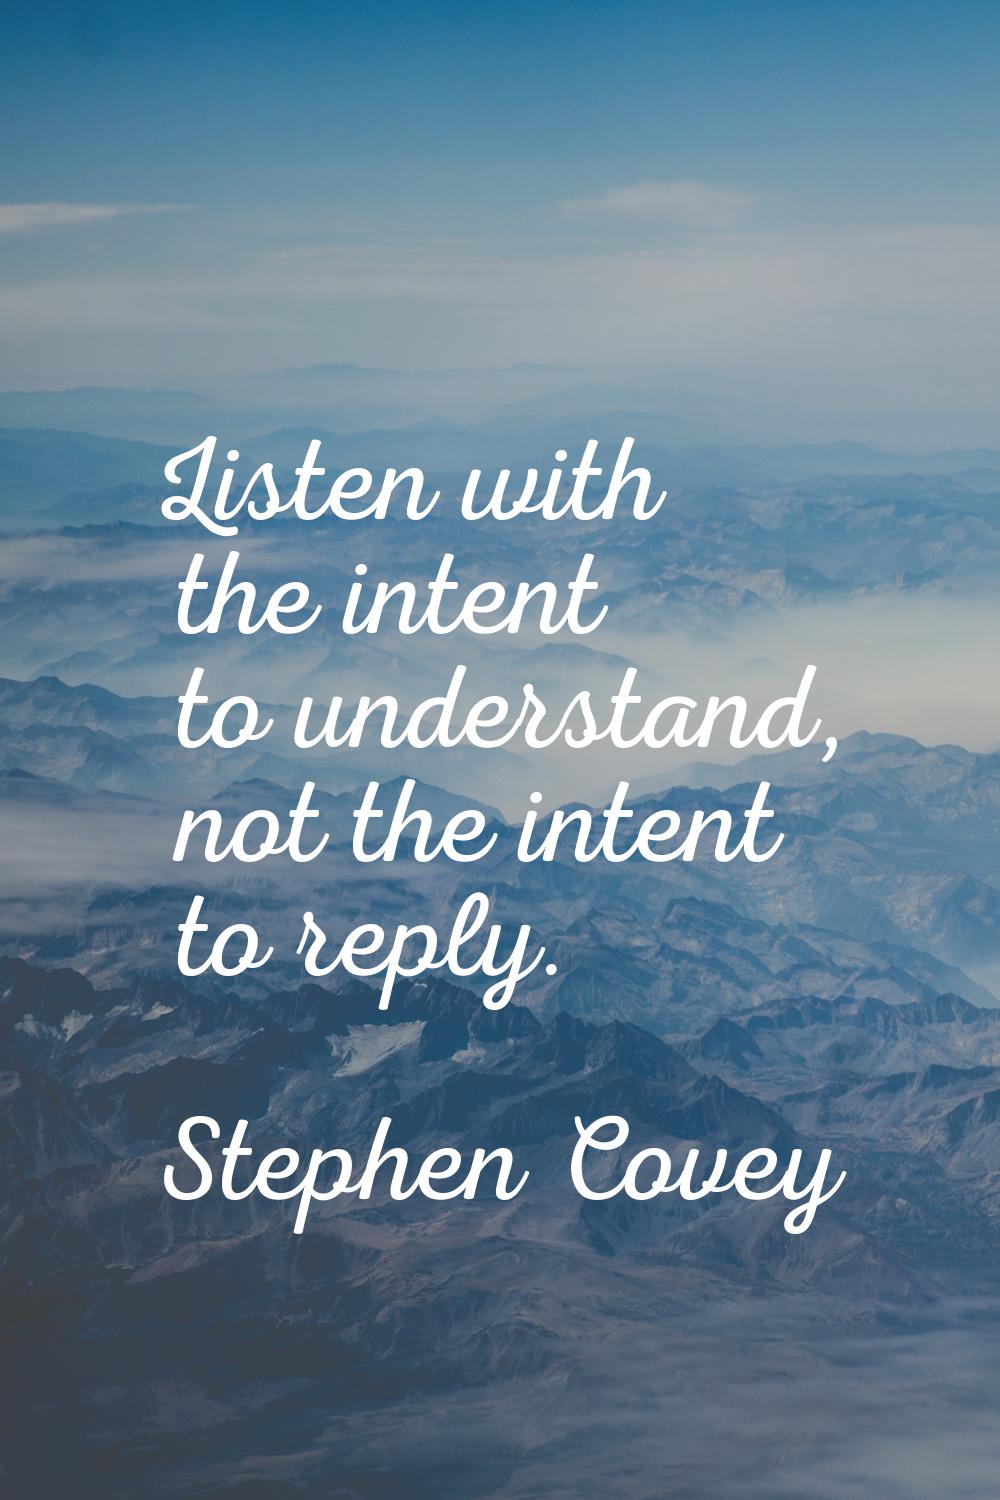 Listen with the intent to understand, not the intent to reply.